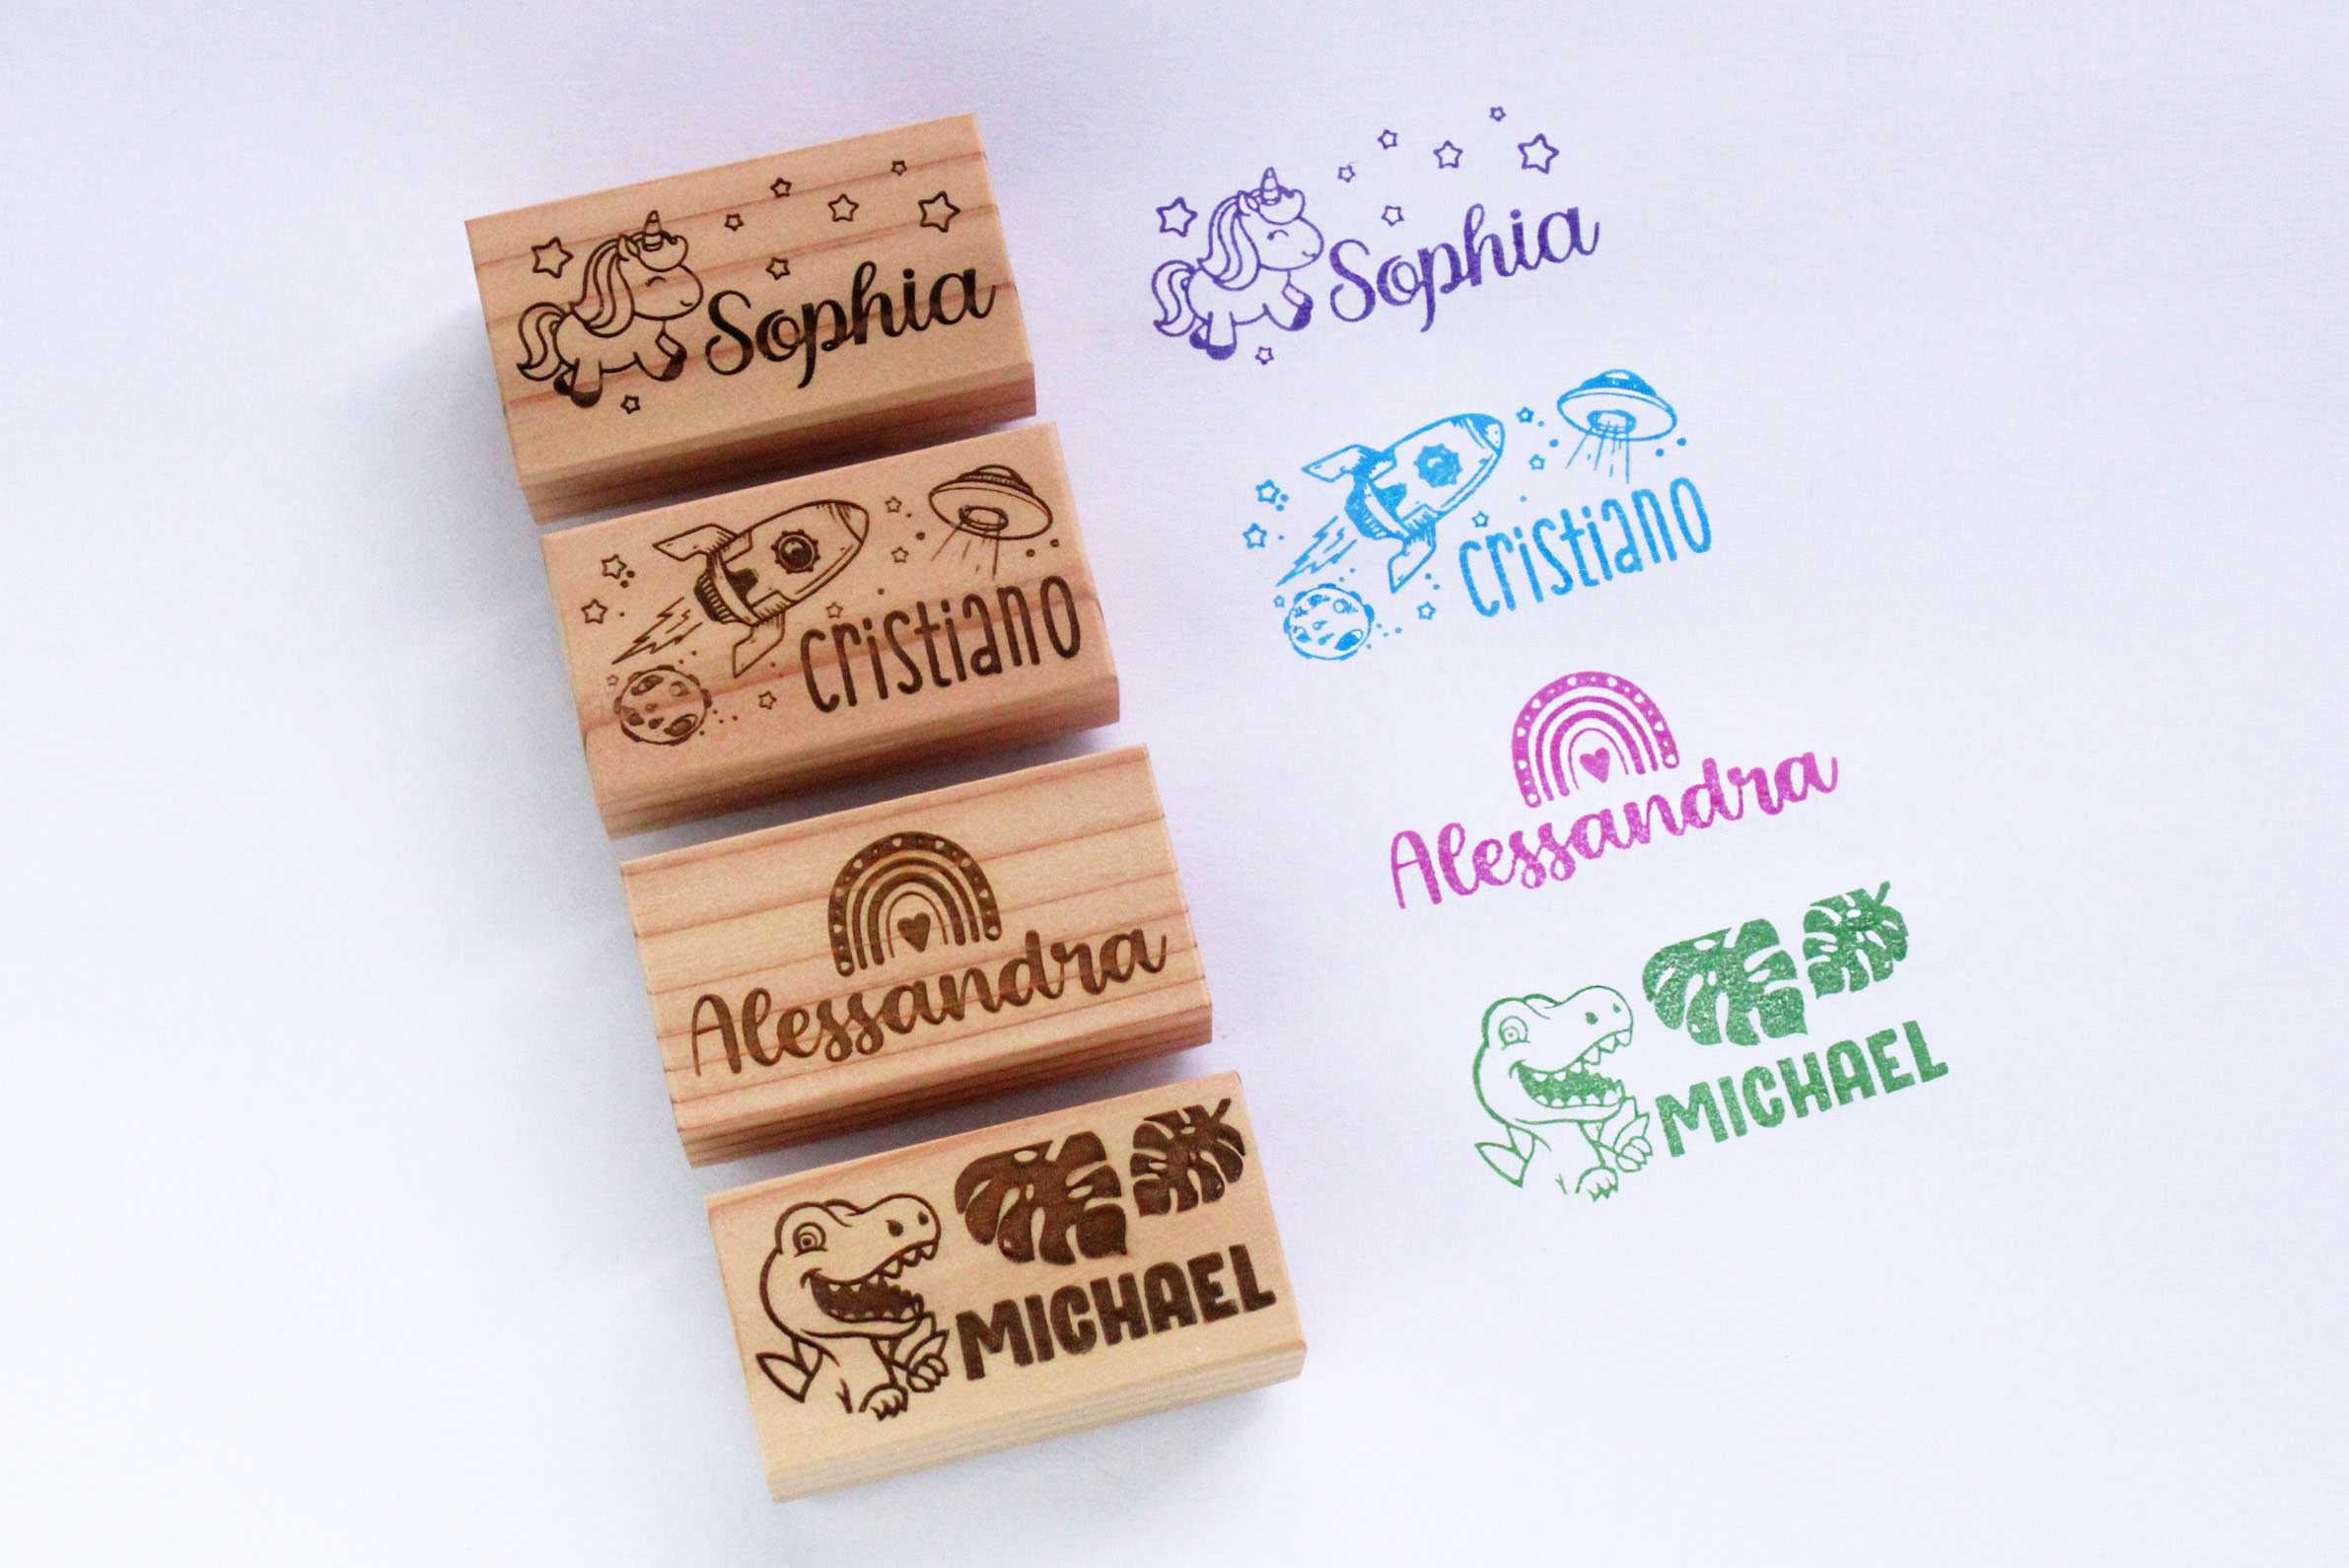 Kids Clothing Labels Stamp and Fabric Ink for Daycare or Camp, Children's  Name Clothes Stamp, Custom Fabric Stamp for Kid's Clothes CS-10368 